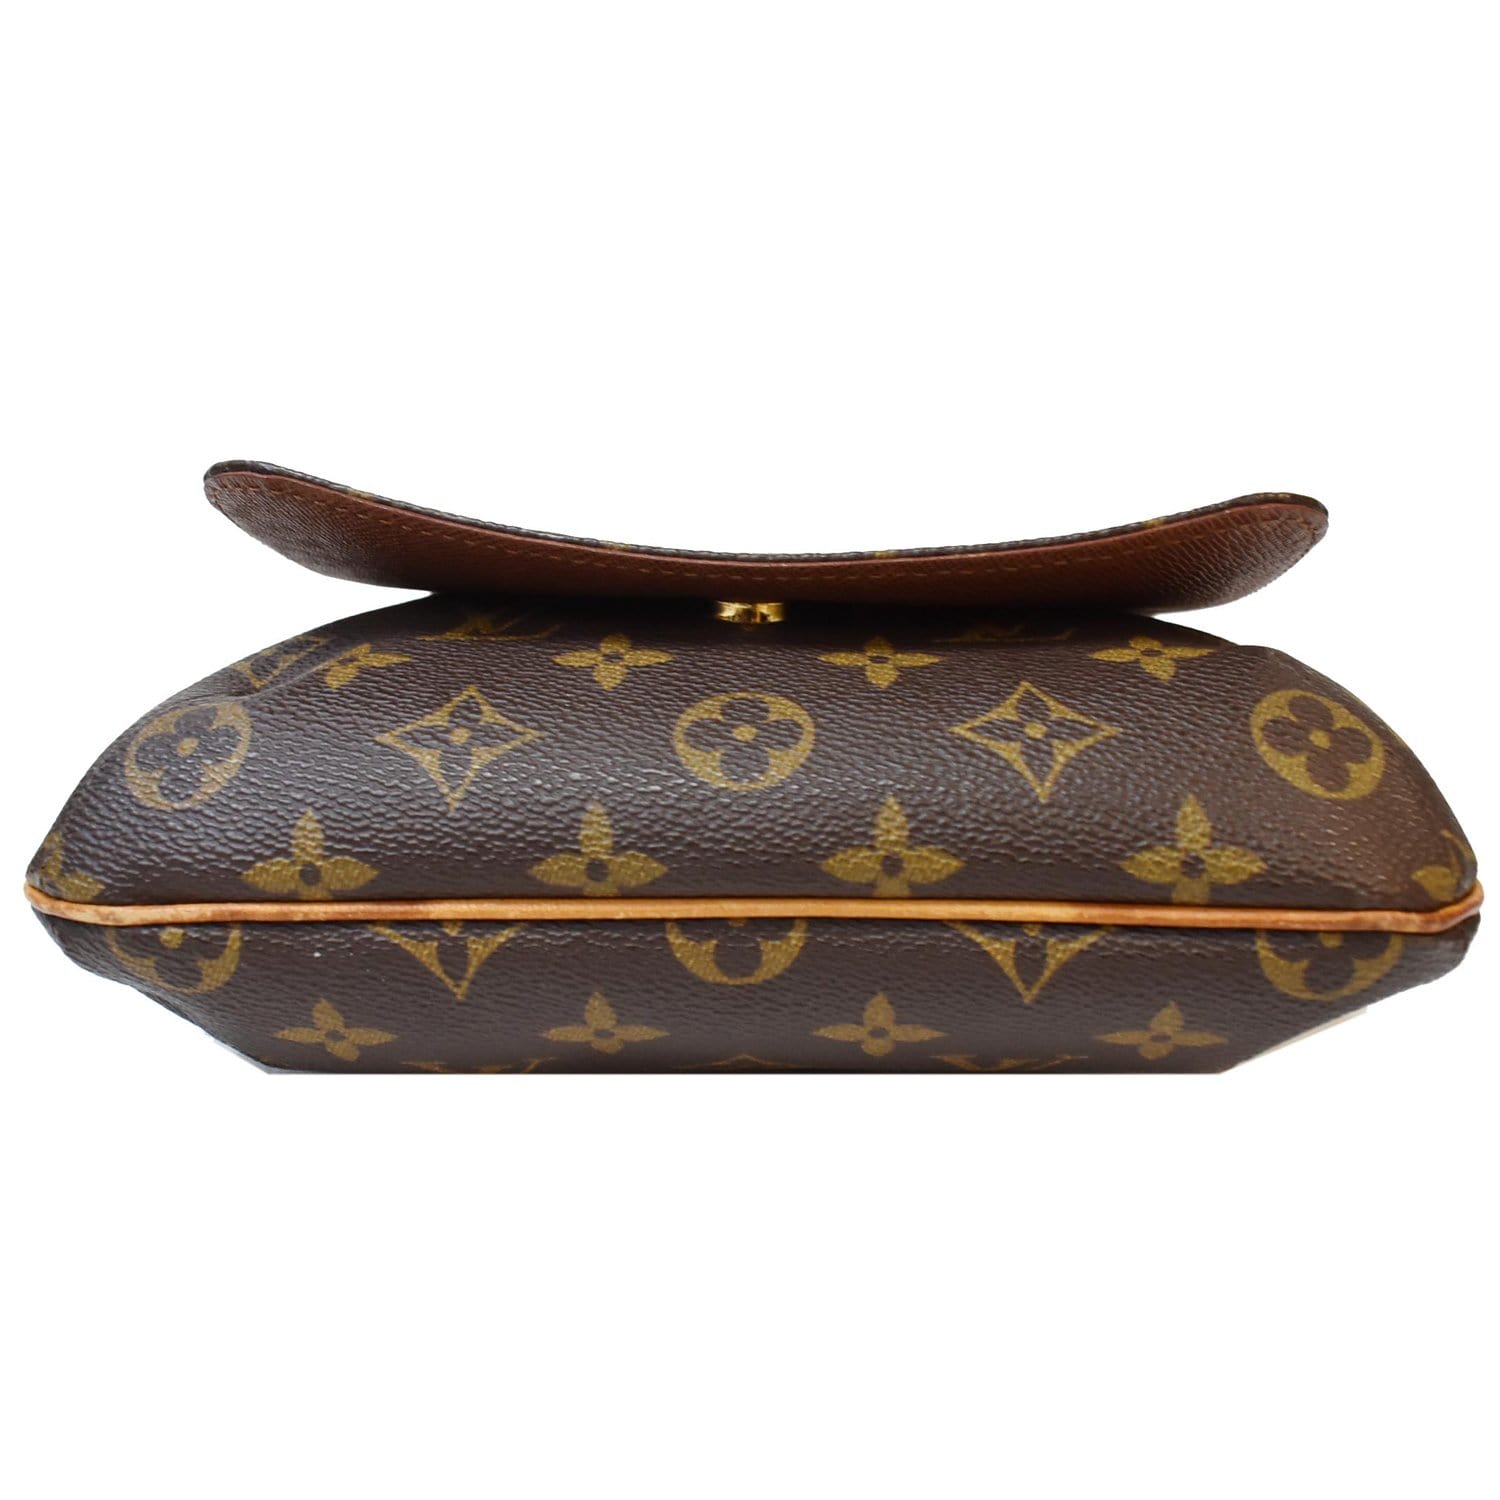 Authentic LOUIS VUITTON Musette Salsa Shoulder Bag Vintage Collectible LV  Monogram Canvas Brown - Gently Pre- Owned lv AS0031 Made in France